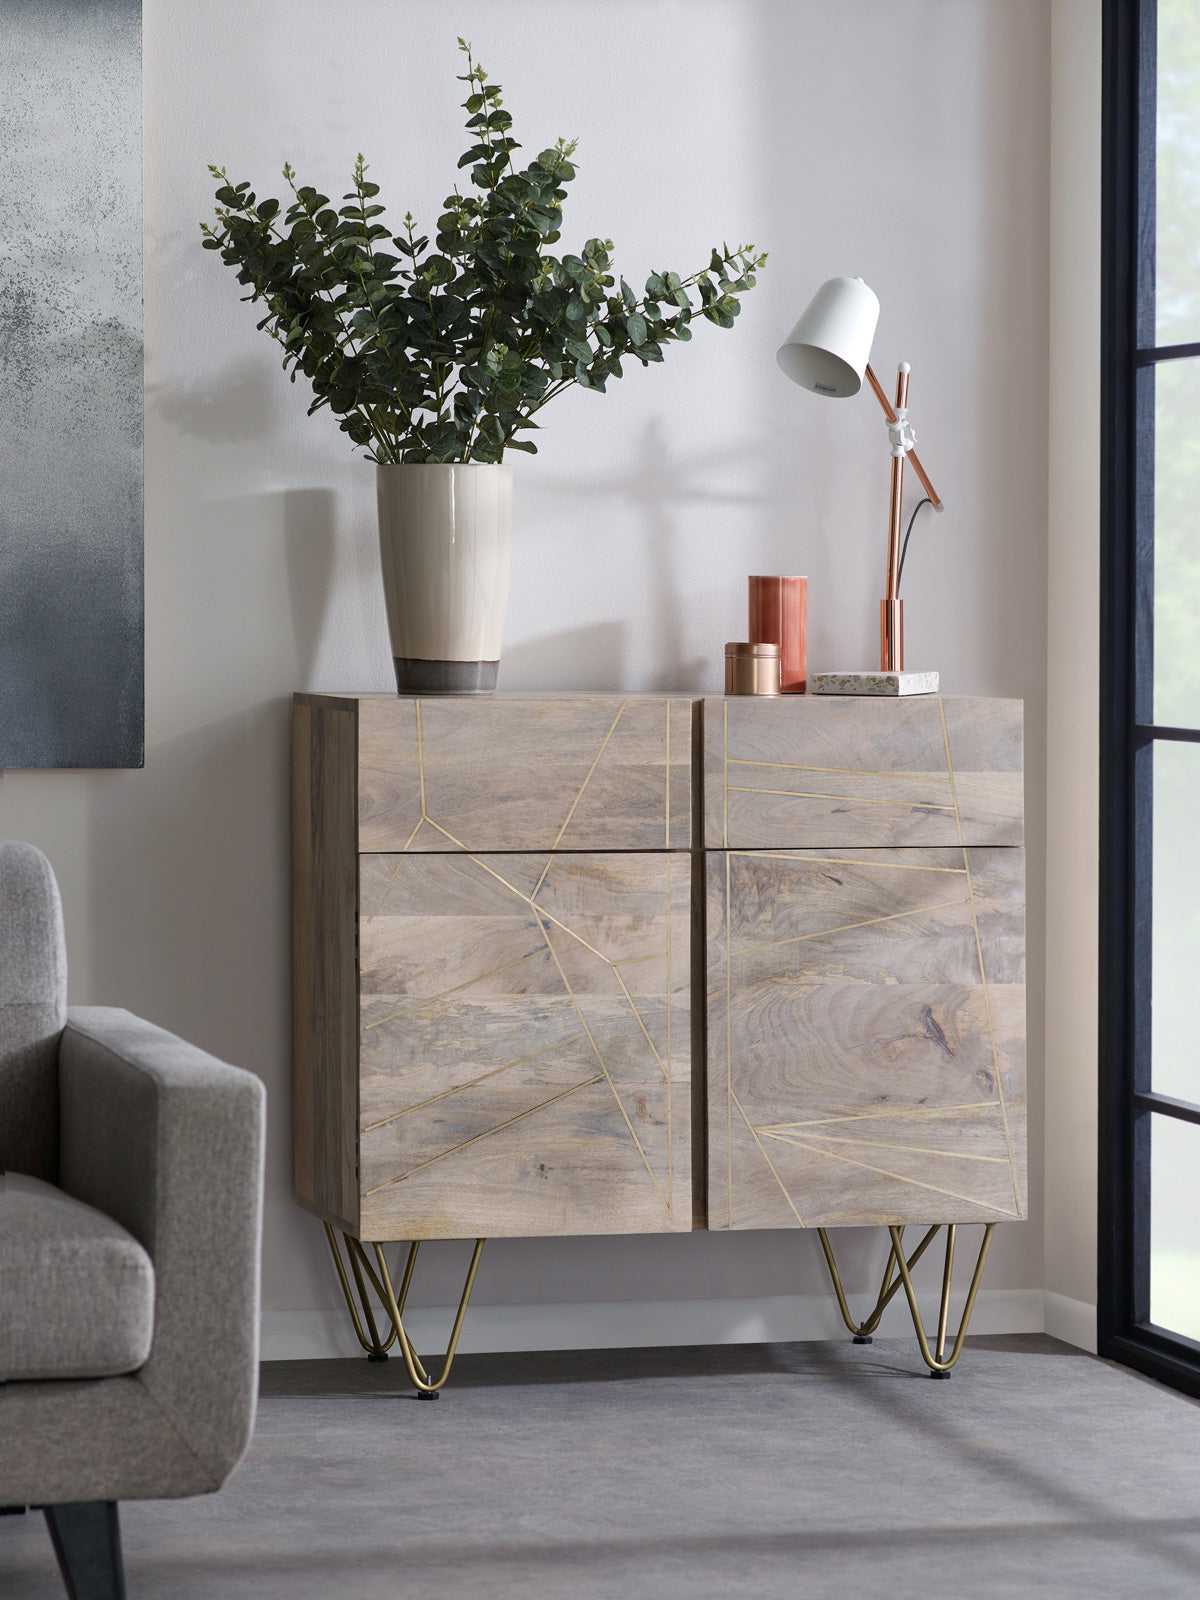 Abstract Small Sideboard